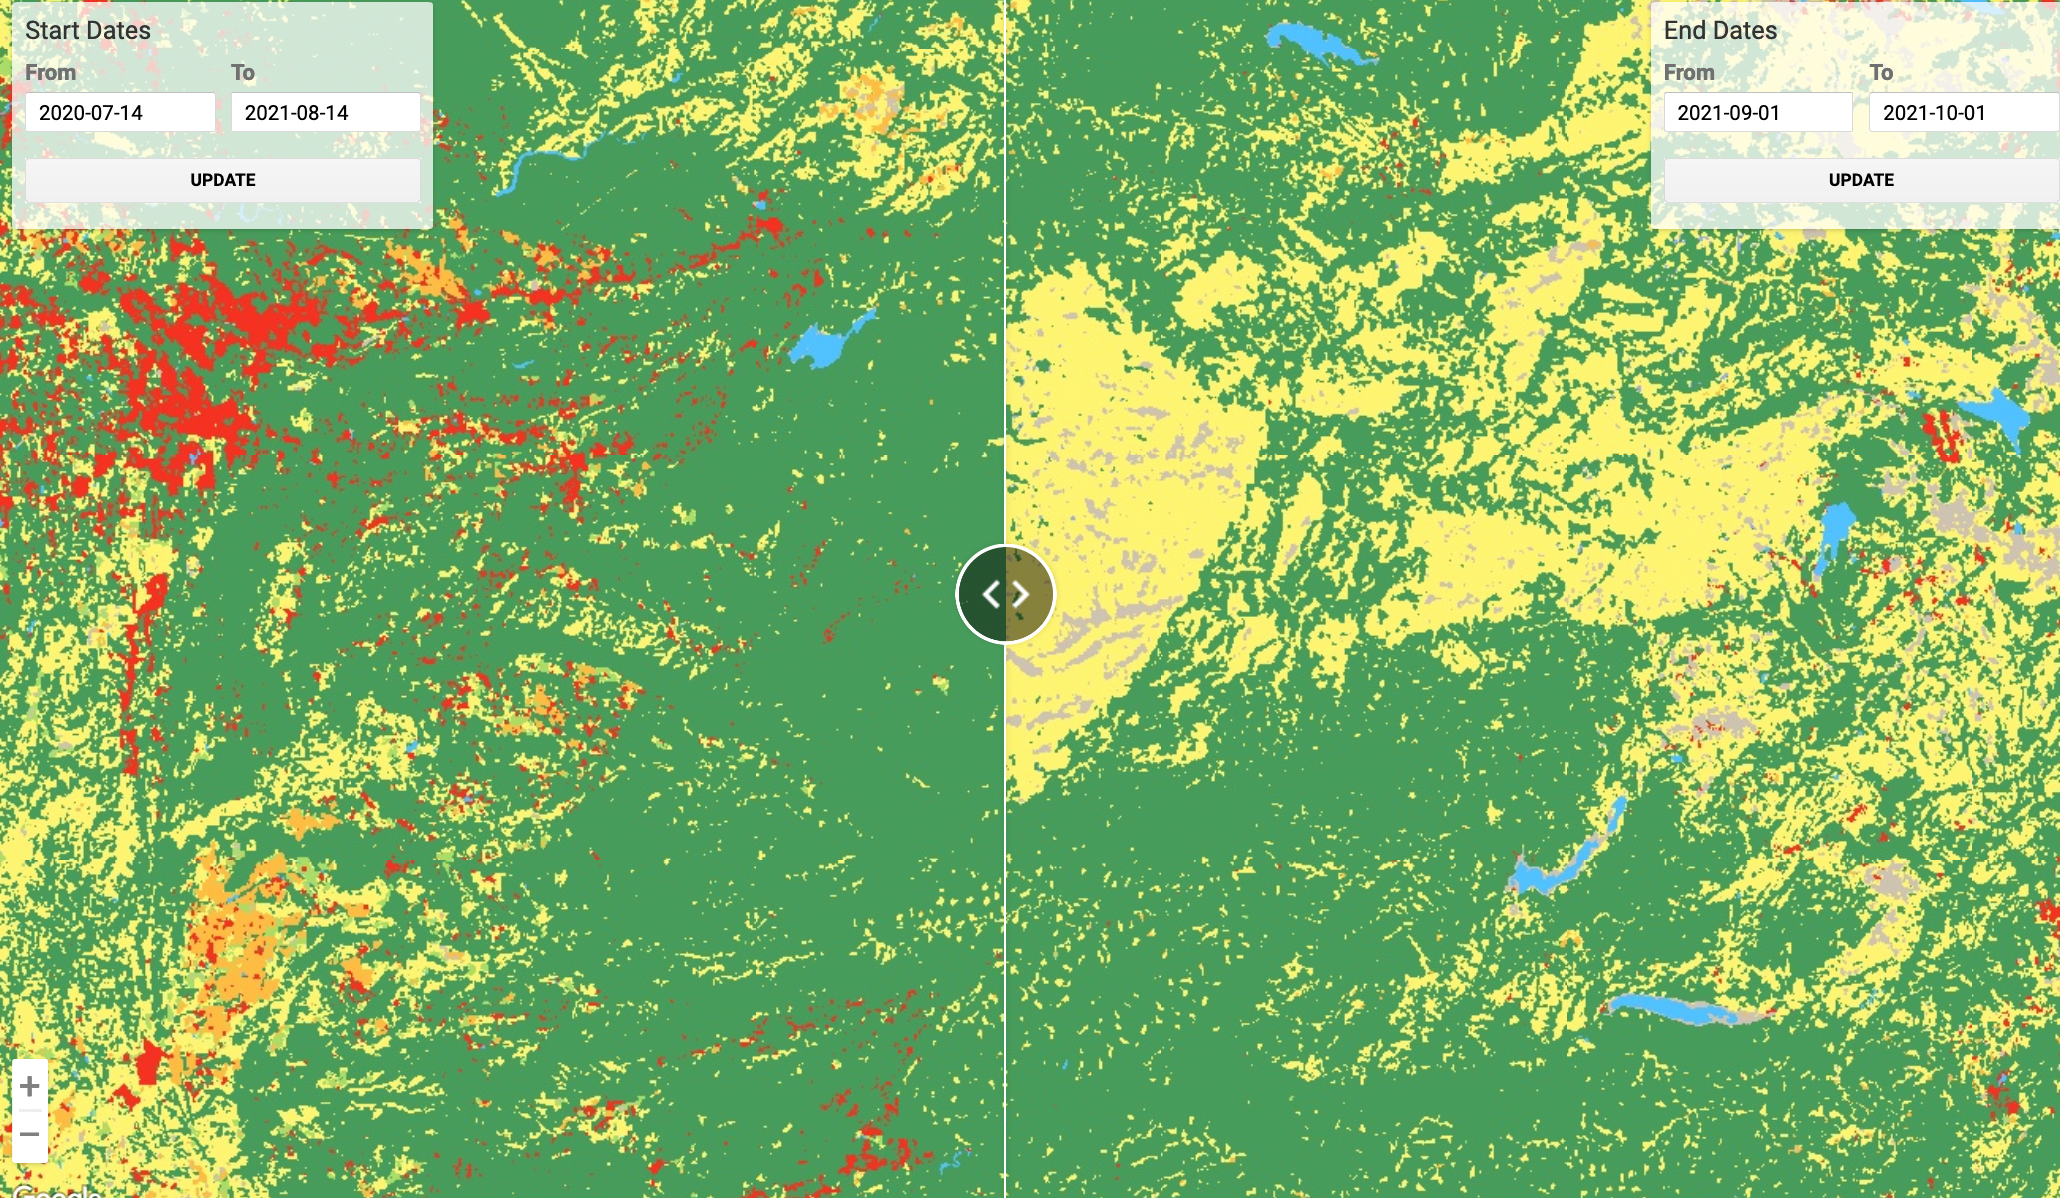 A comparison between northern California pre- and post-Caldor fire. Areas in green are tree cover and areas in yellow are “shrub and scrub"